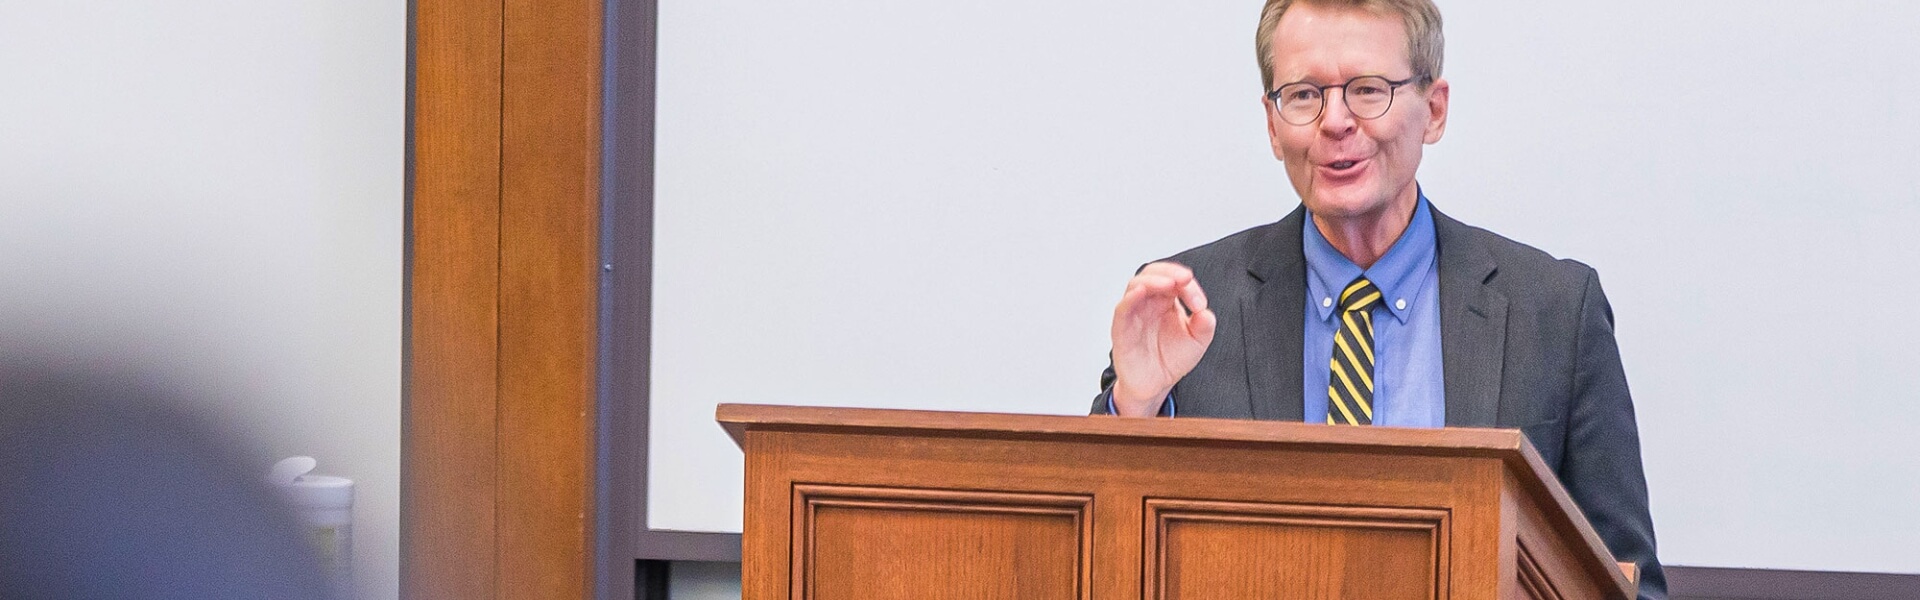 At U-M’s annual Constitution Day commemoration, conservative law professor Michael Stokes Paulsen outlined the argument that Donald Trump is ineligible to run for president in 2024, based on provisions in Section 3 of the 14th Amendment to the Constitution. 